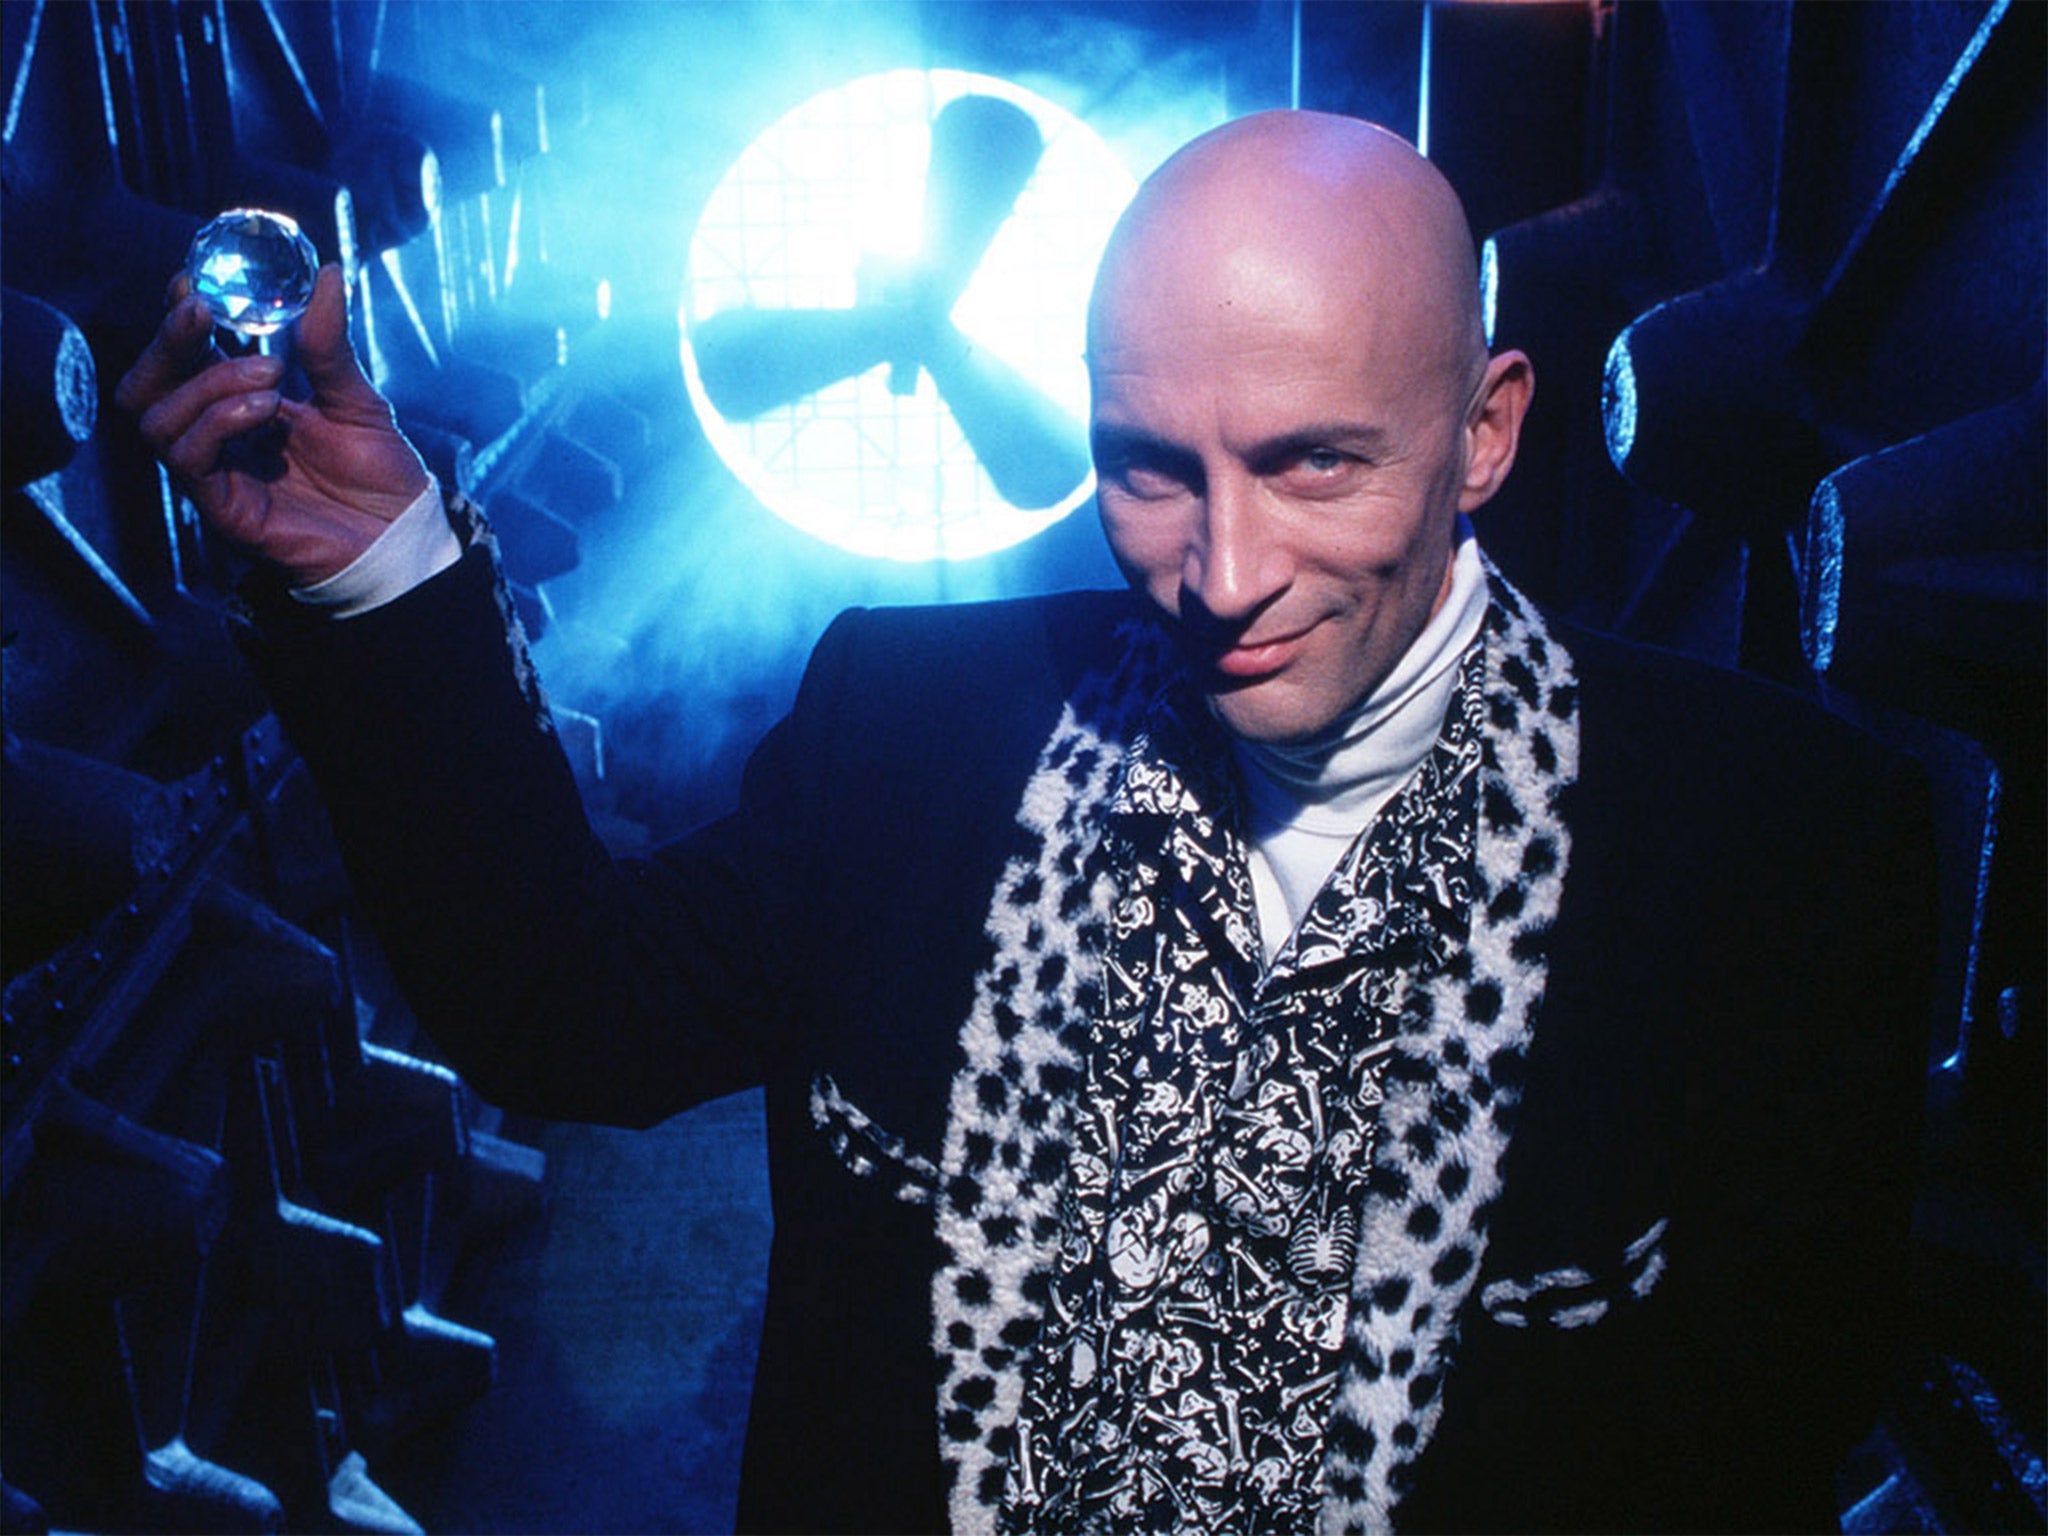 Original Crystal Maze host Richard O'Brien holds one of the coveted gems aloft